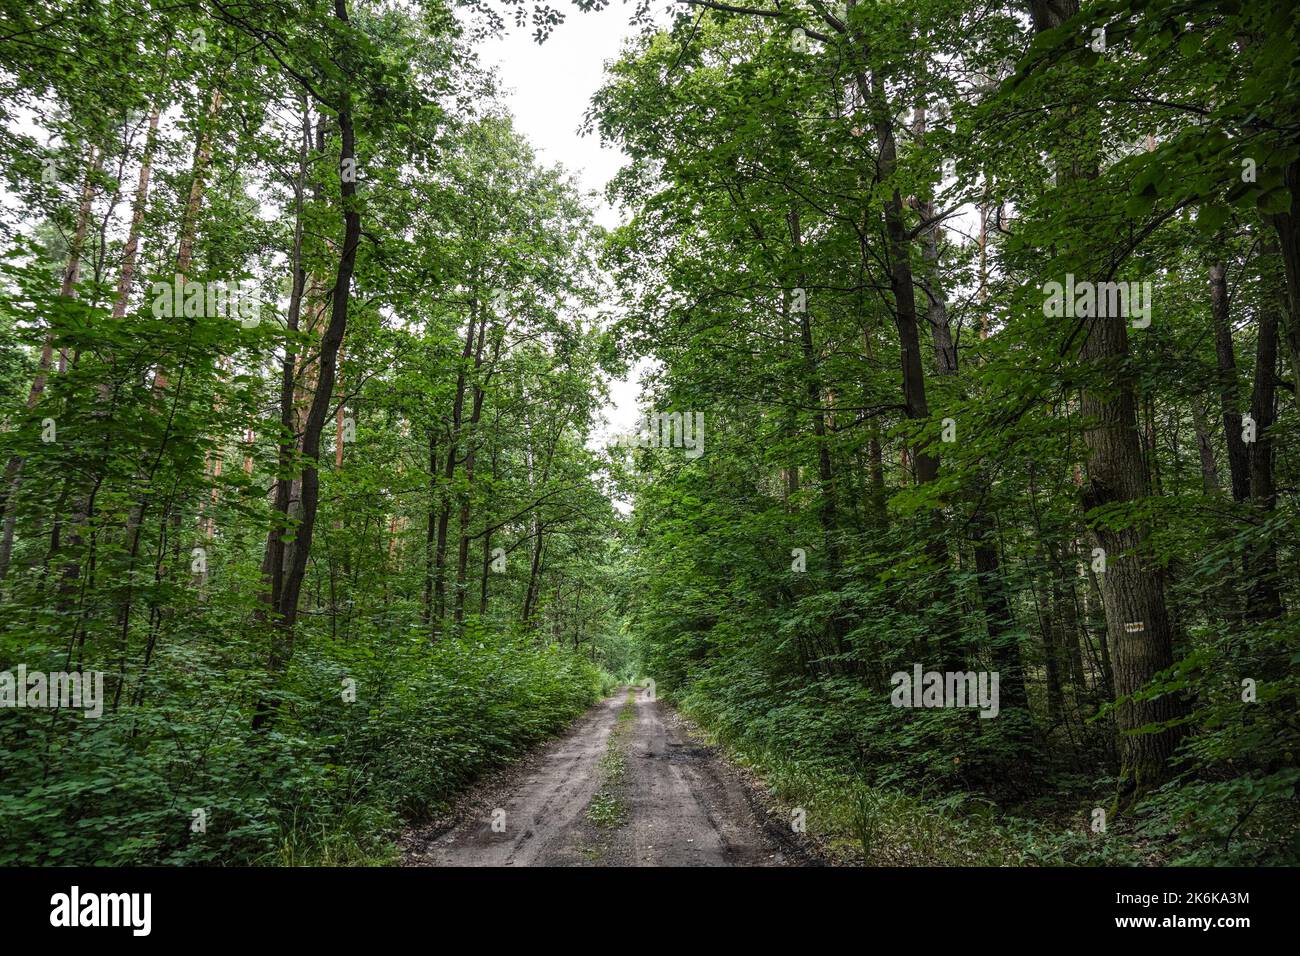 Empty ground road in a forest Stock Photo